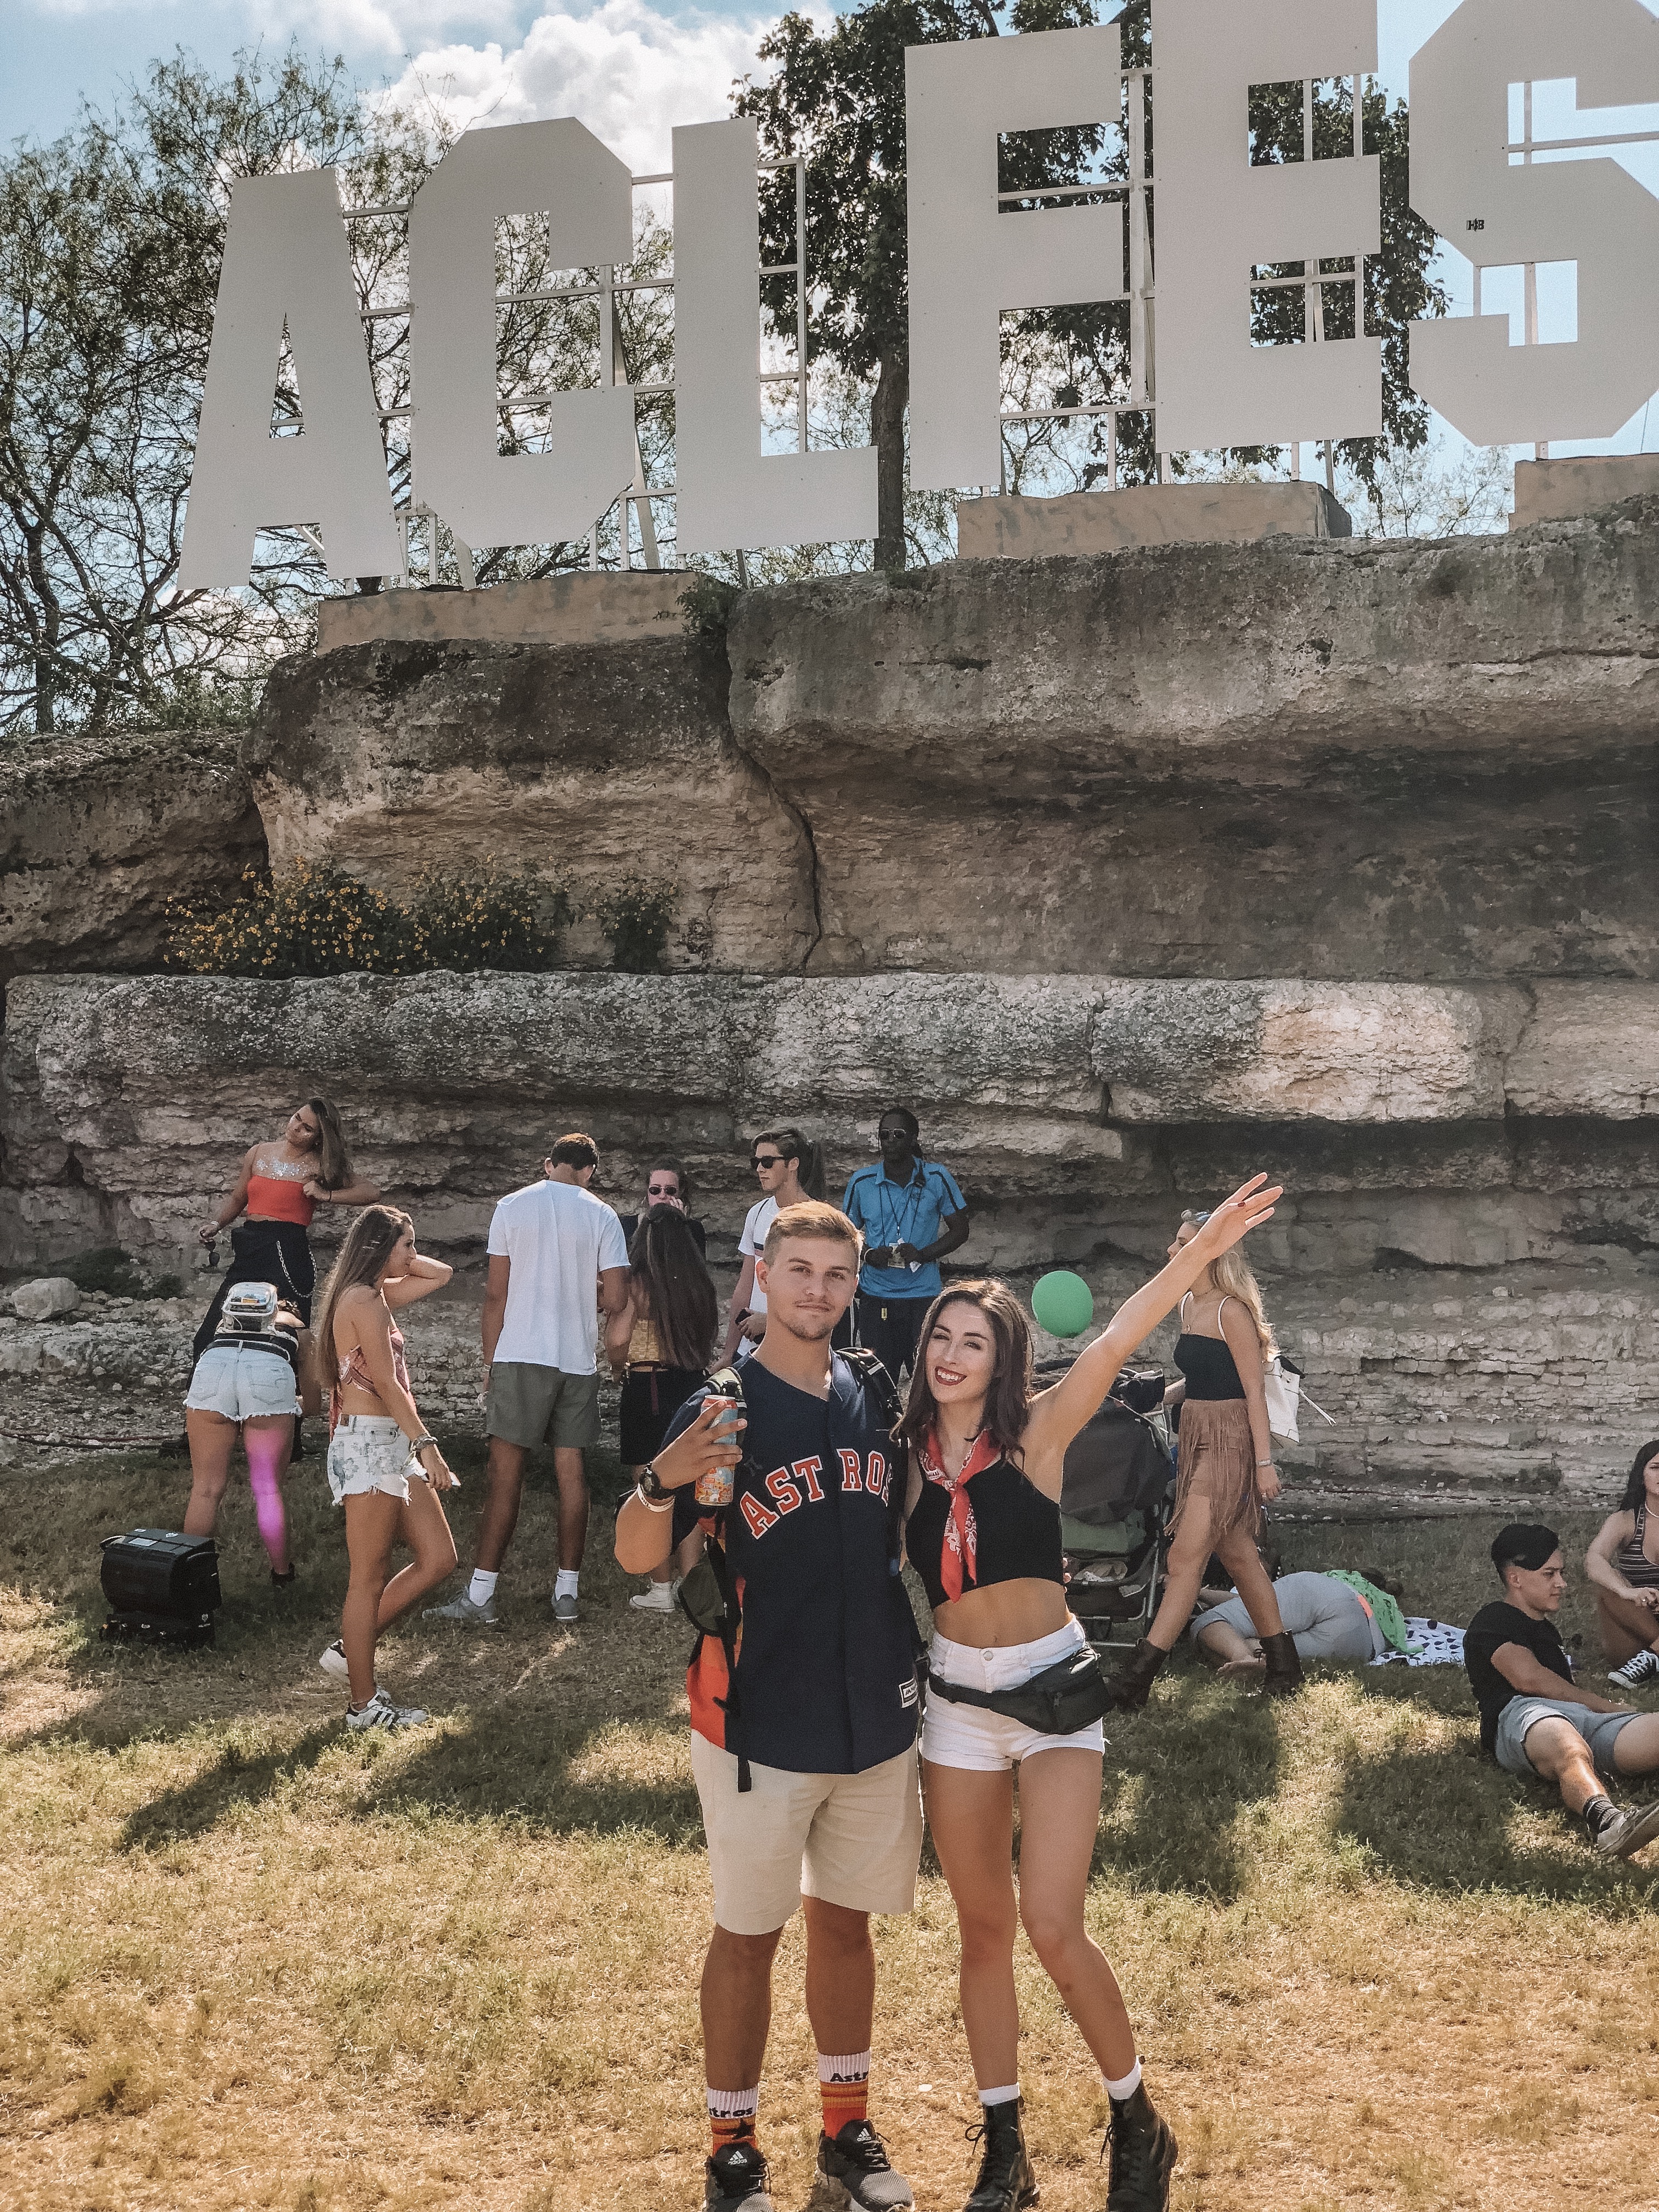 Austin City Limits Texas - The Ultimate Music Festival Experience